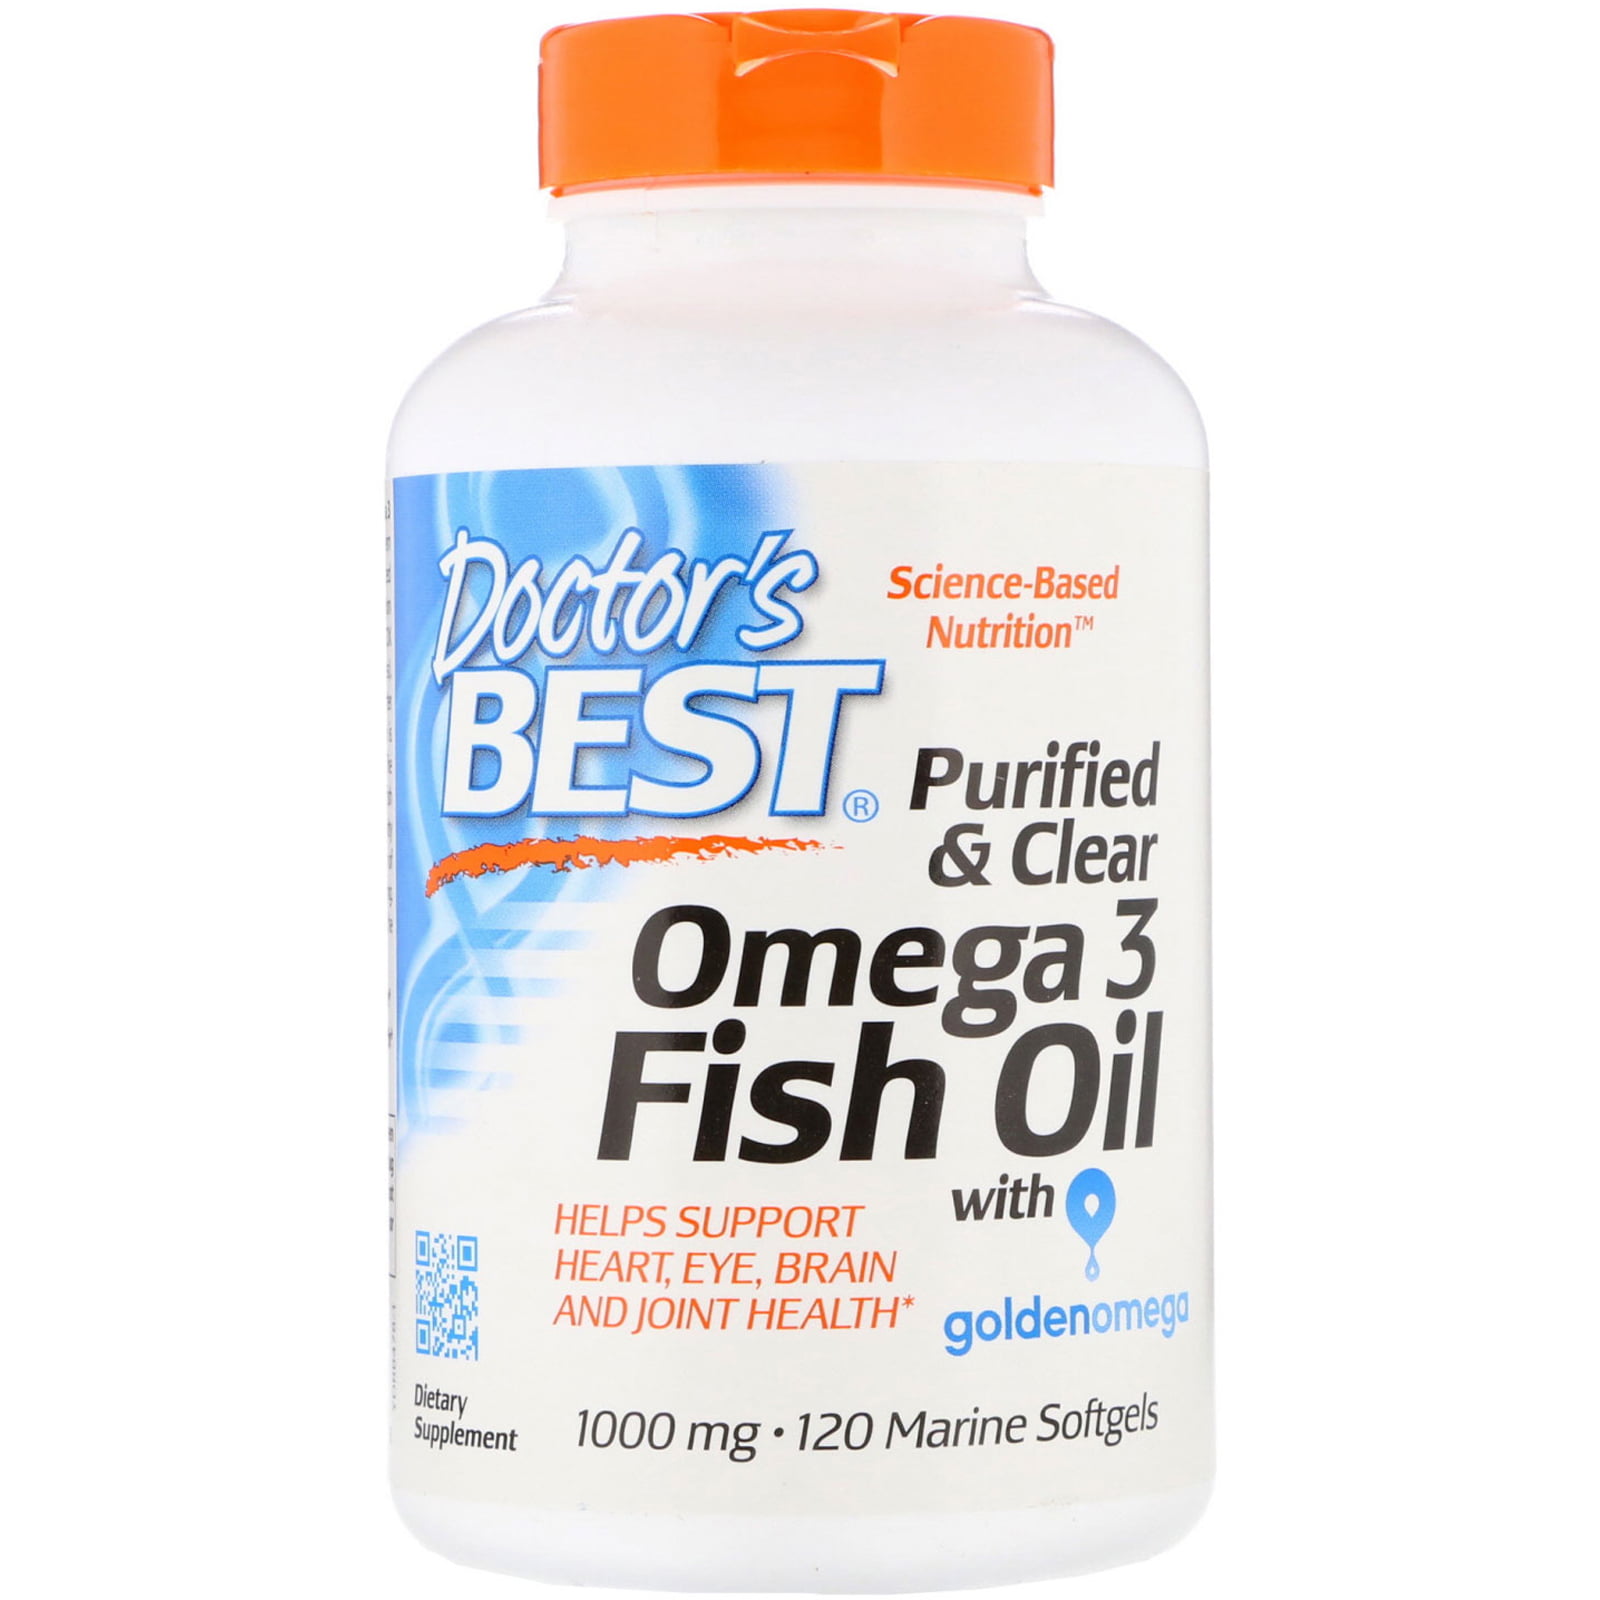 Doctor's Best Purified & Clear Omega 3 Fish Oil with Goldenomega, 1,000 ...